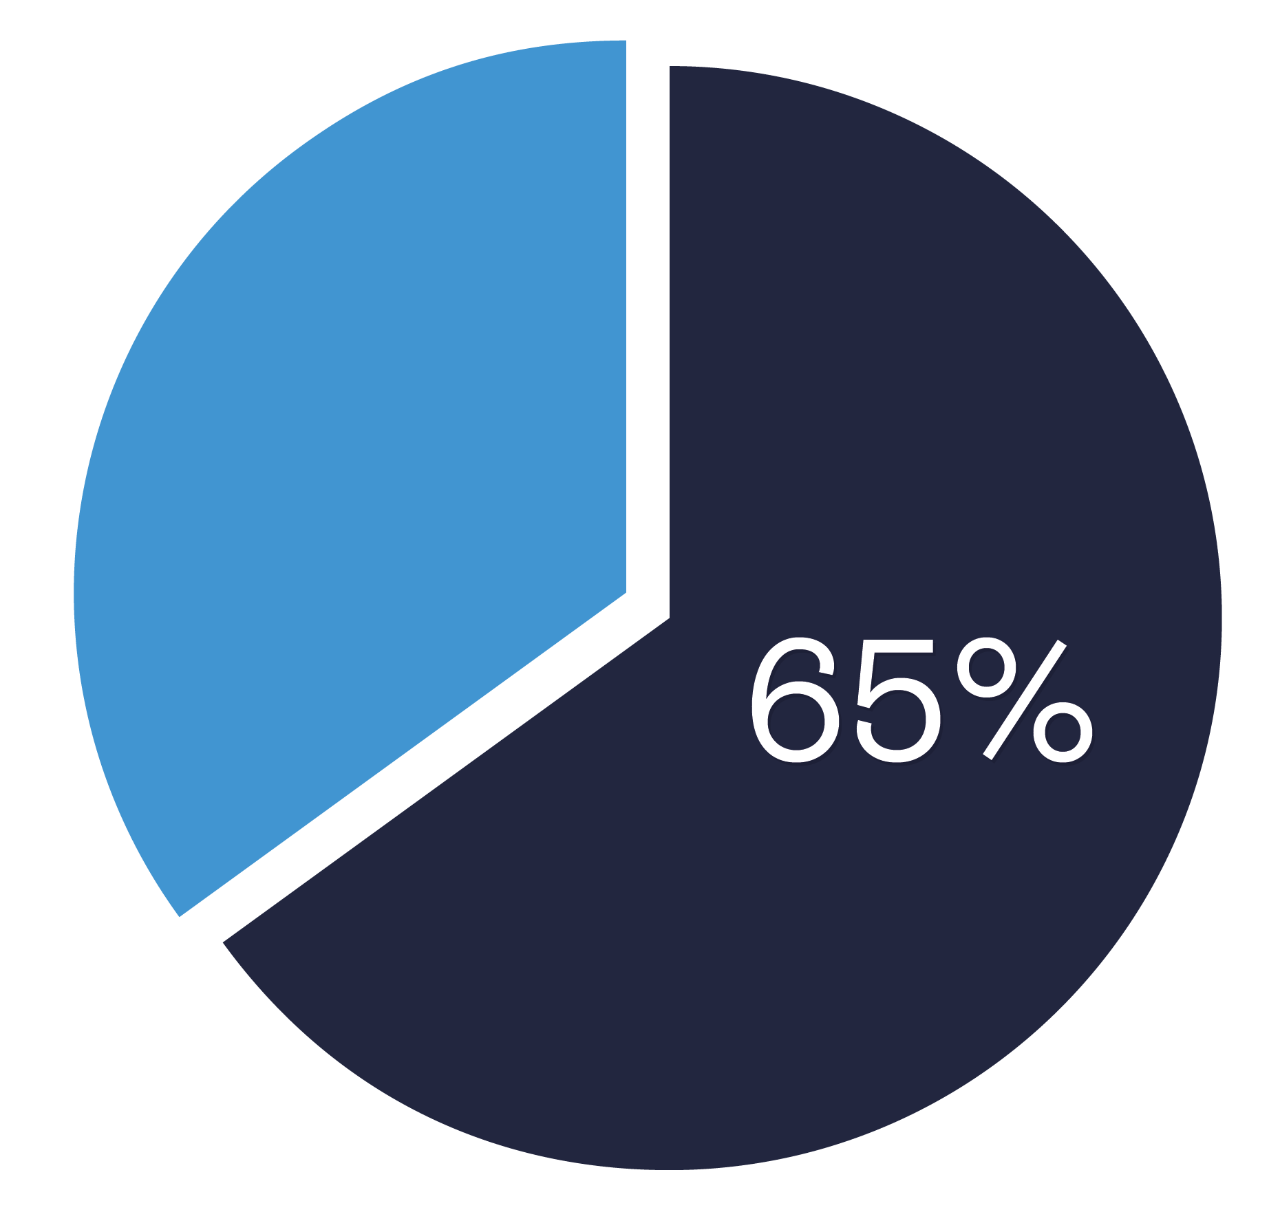 Image shows a pie chart with two sections, the left section is in light blue and a smaller segment. The right section is in dark blue and the larger segment, within this segment is white text that reads 65%.